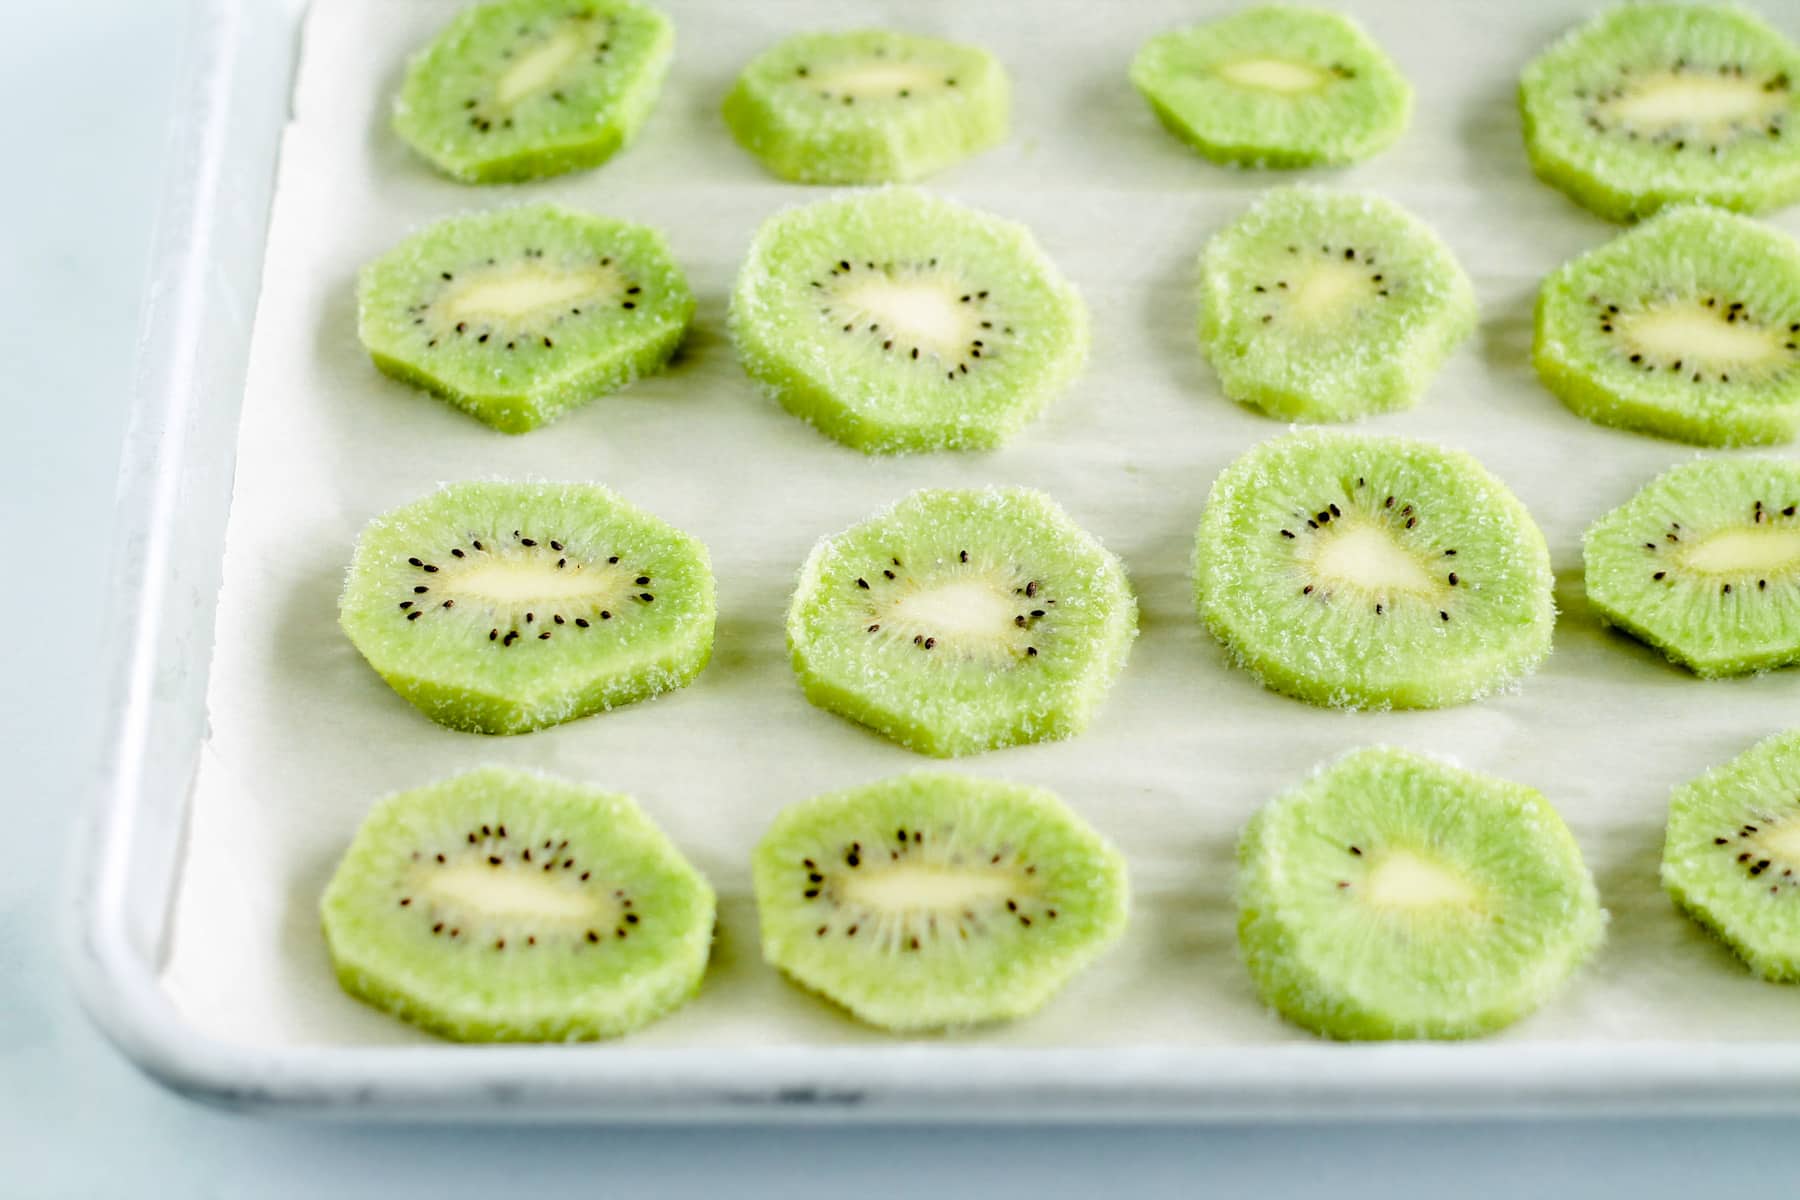 slices of frozen kiwi on a parchemnt lined tray.